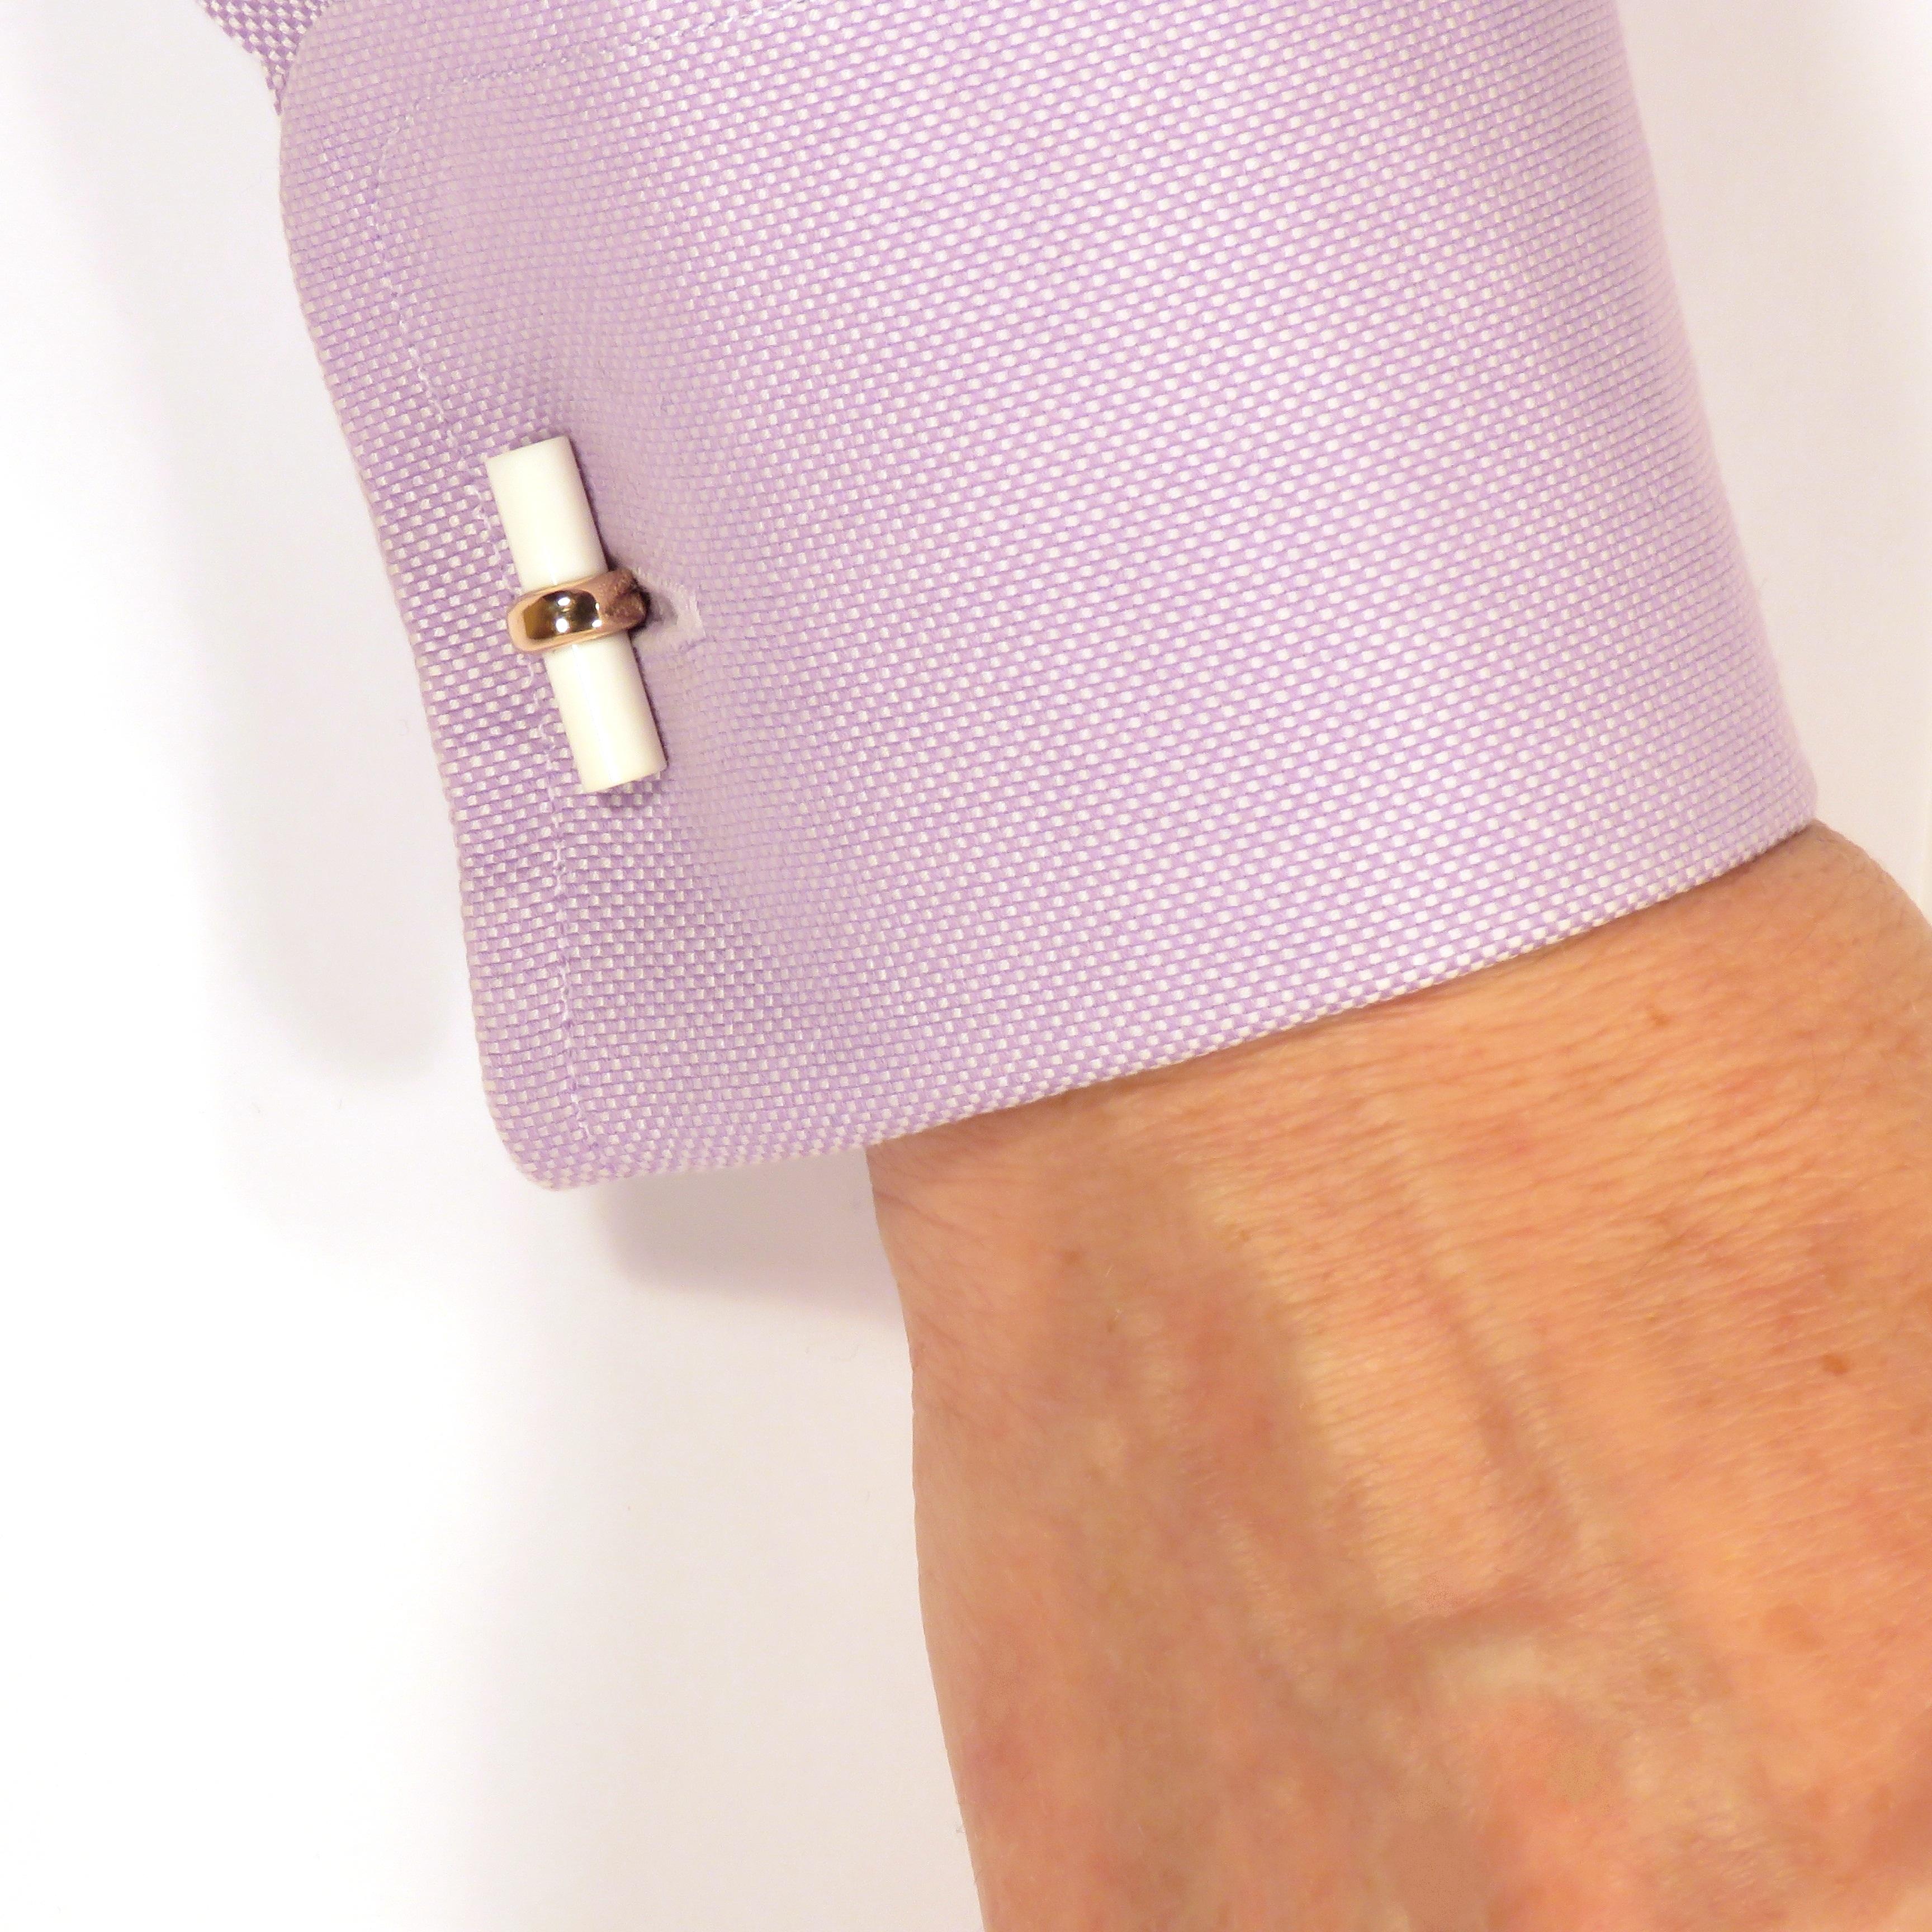 Men's Rose Gold White Agate Cufflinks Handcrafted in Italy by Botta Gioielli